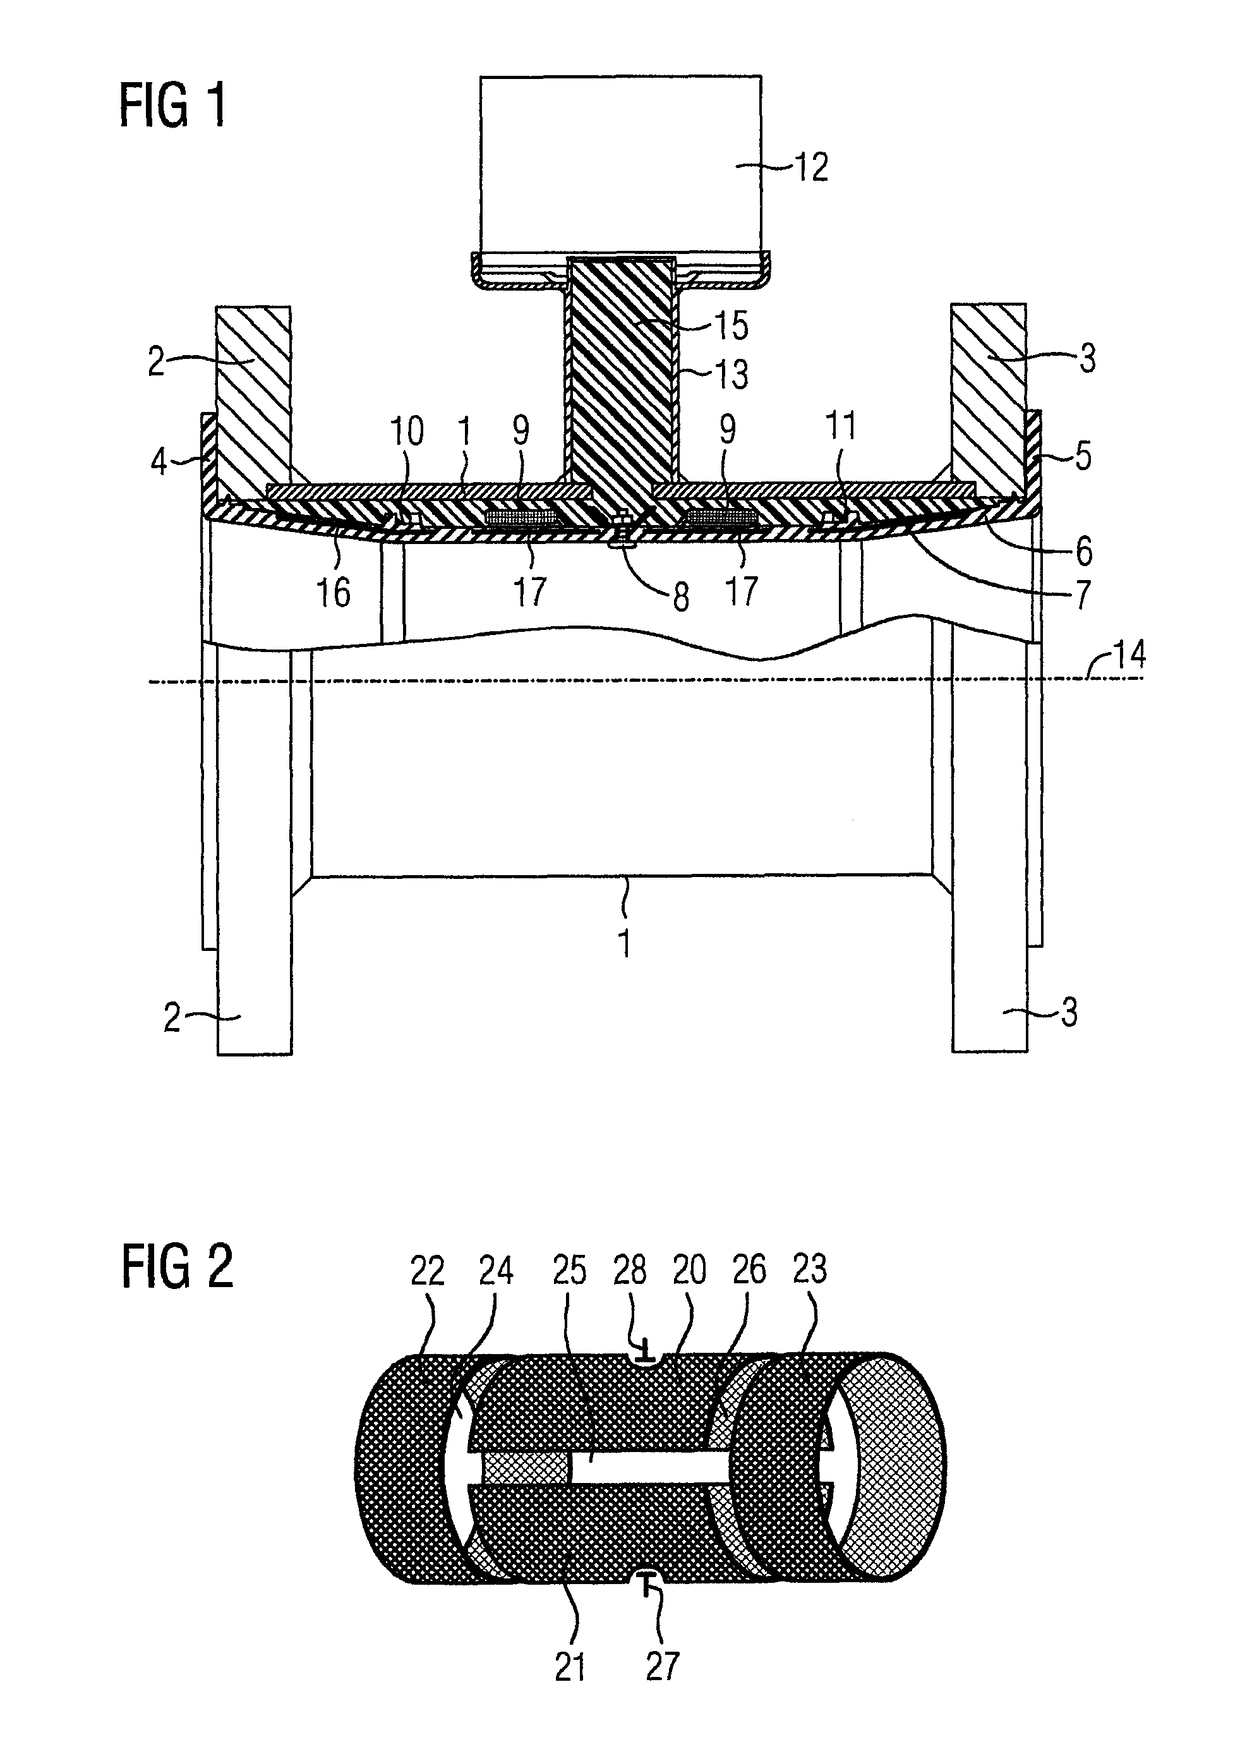 Magnetically inductive flow meter having a first electrode arrangement for galvanically inducing voltage and a second electrode arrangement for capacitively inducing voltage